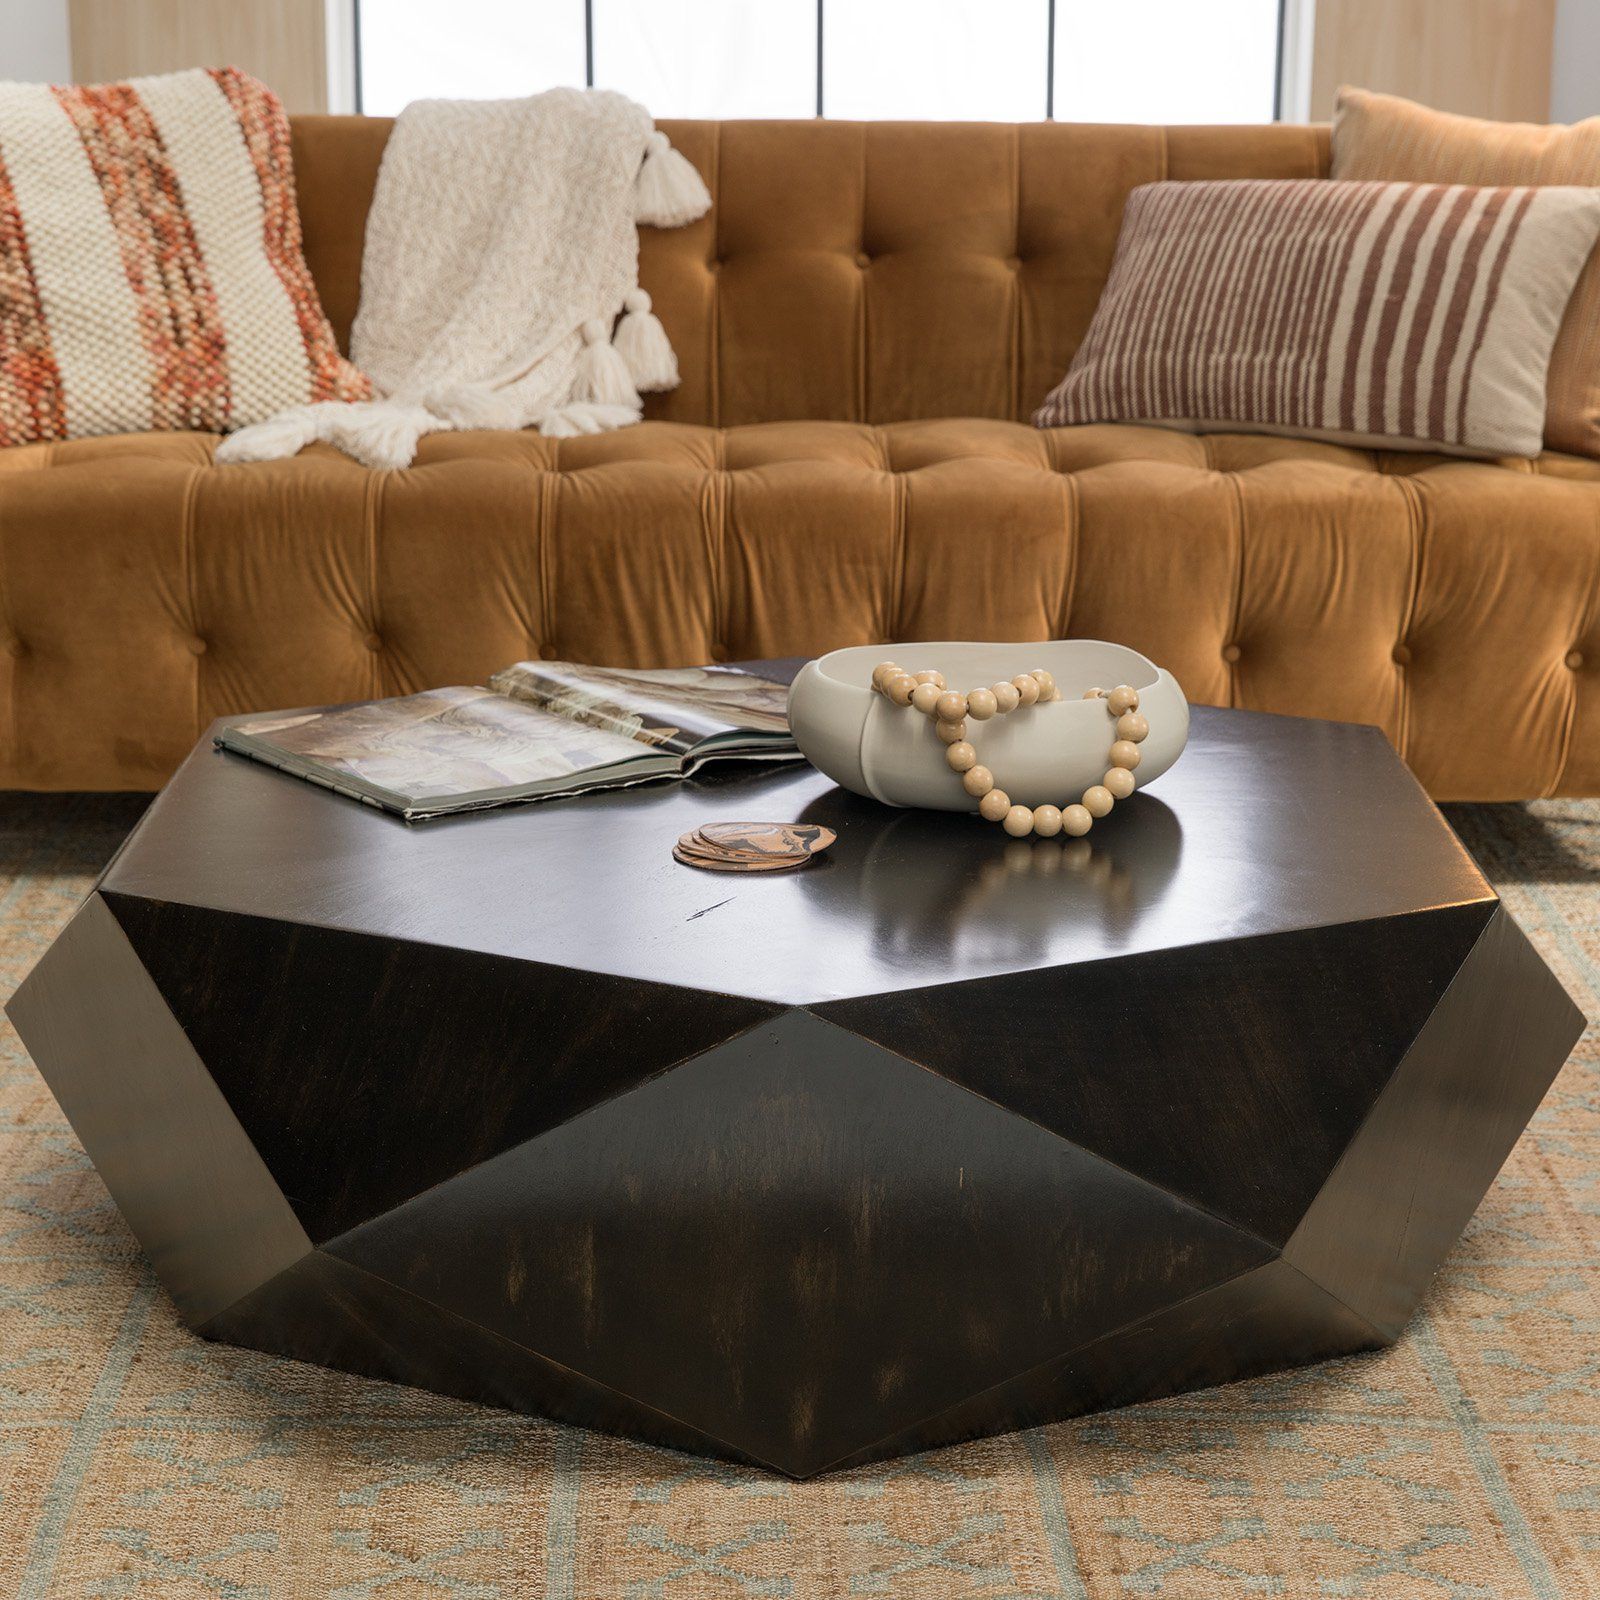 Faceted Large Geometric Coffee Table Round Black Wood Modern Block In Coffee Tables With Solid Legs (Gallery 15 of 20)